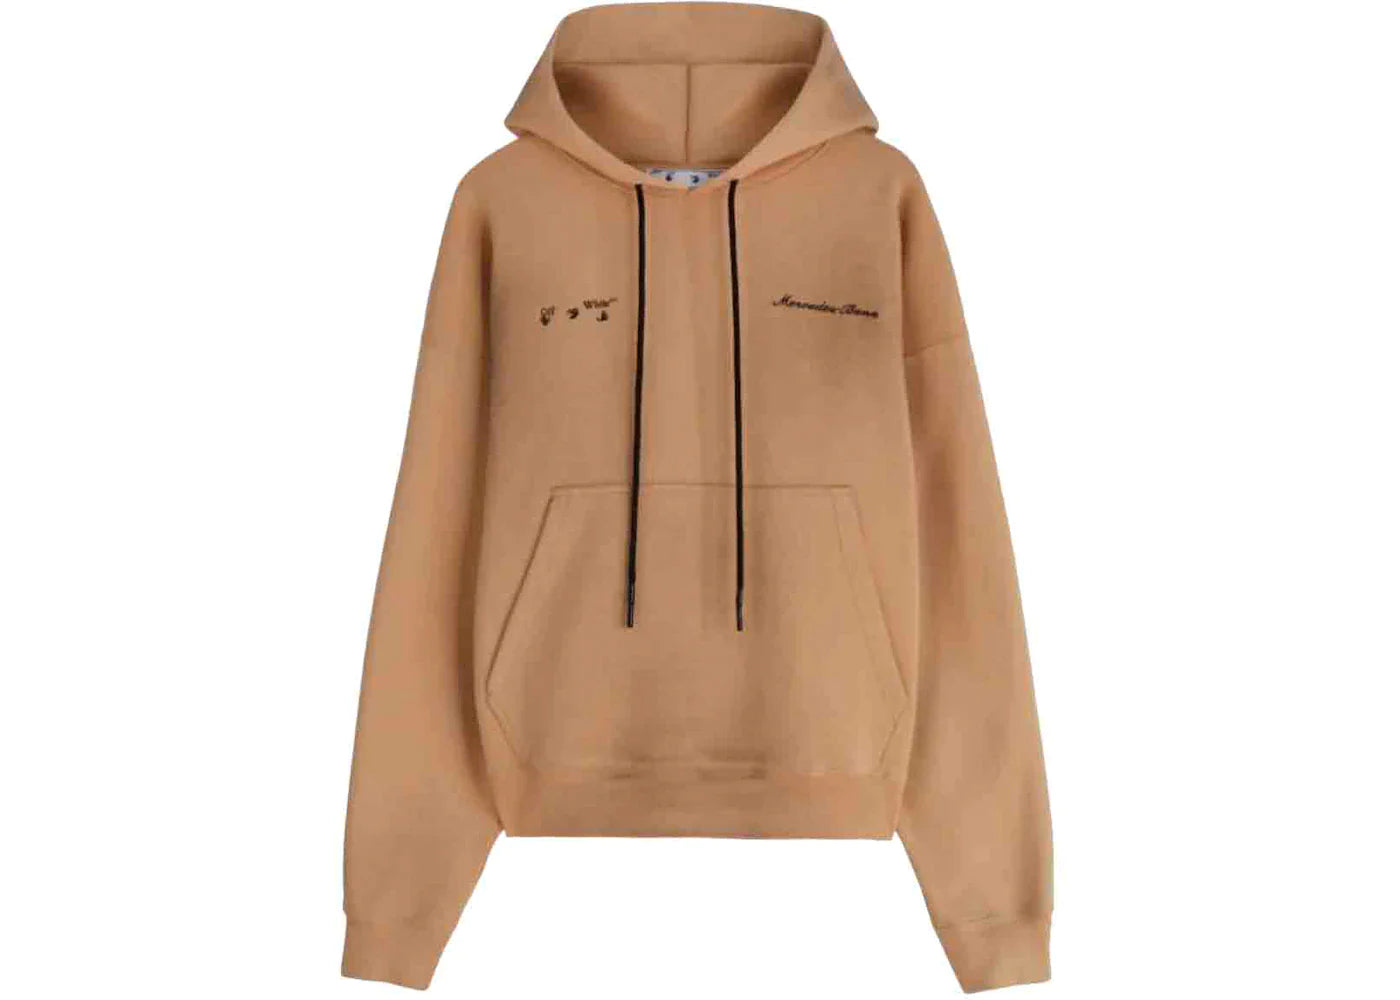 Off-White C/O Project Maybach Hoodie Beige